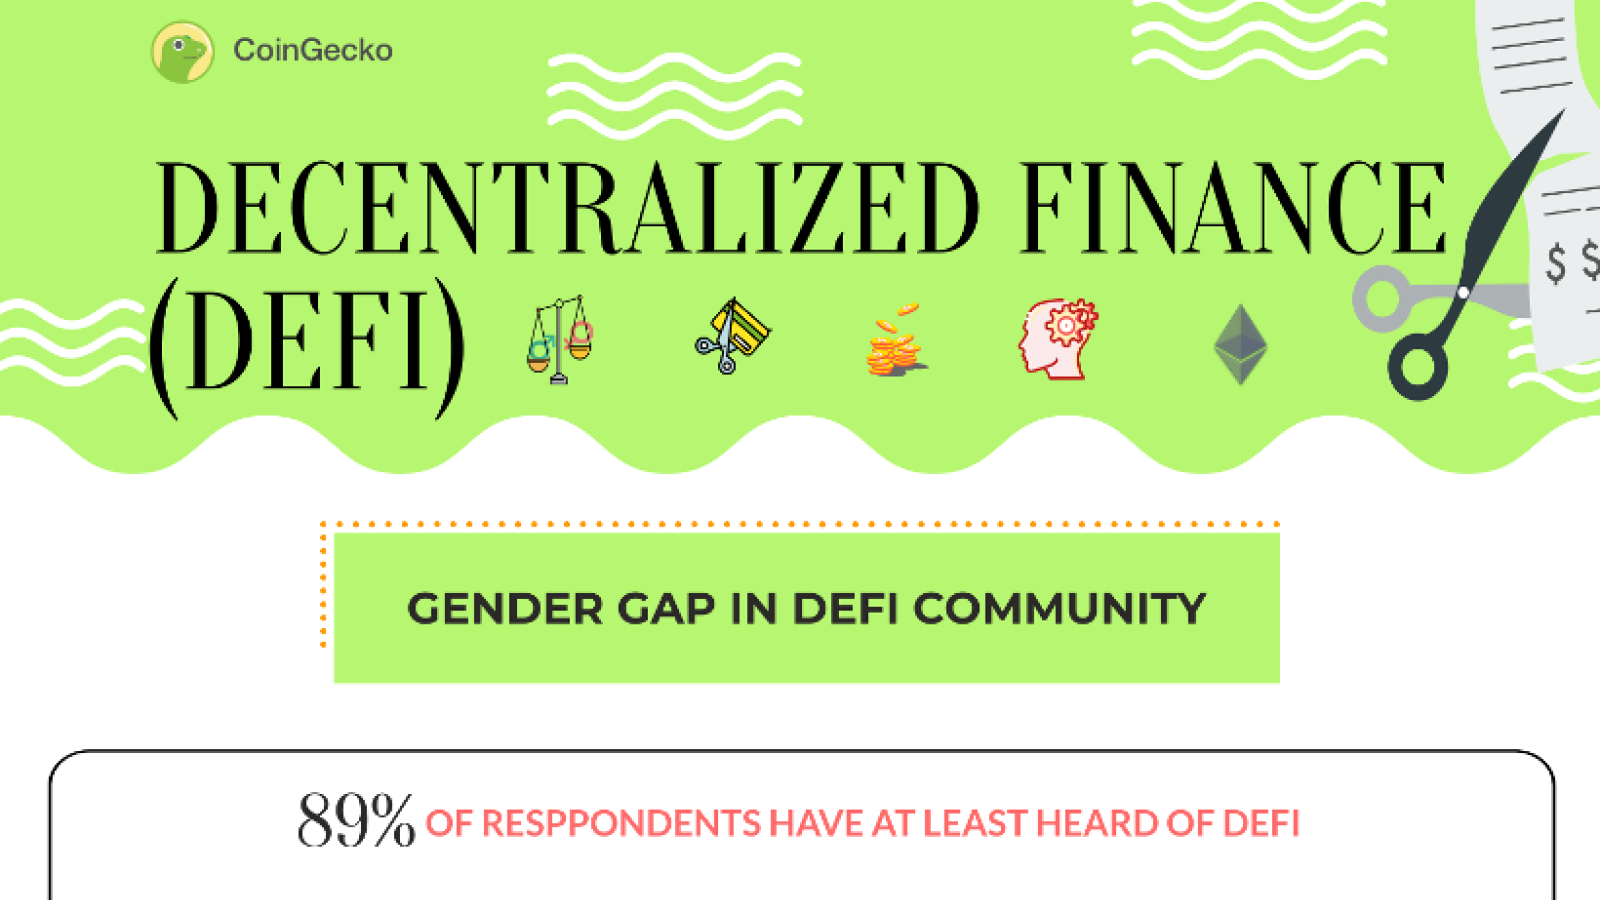 DeFi sector remains male-dominated